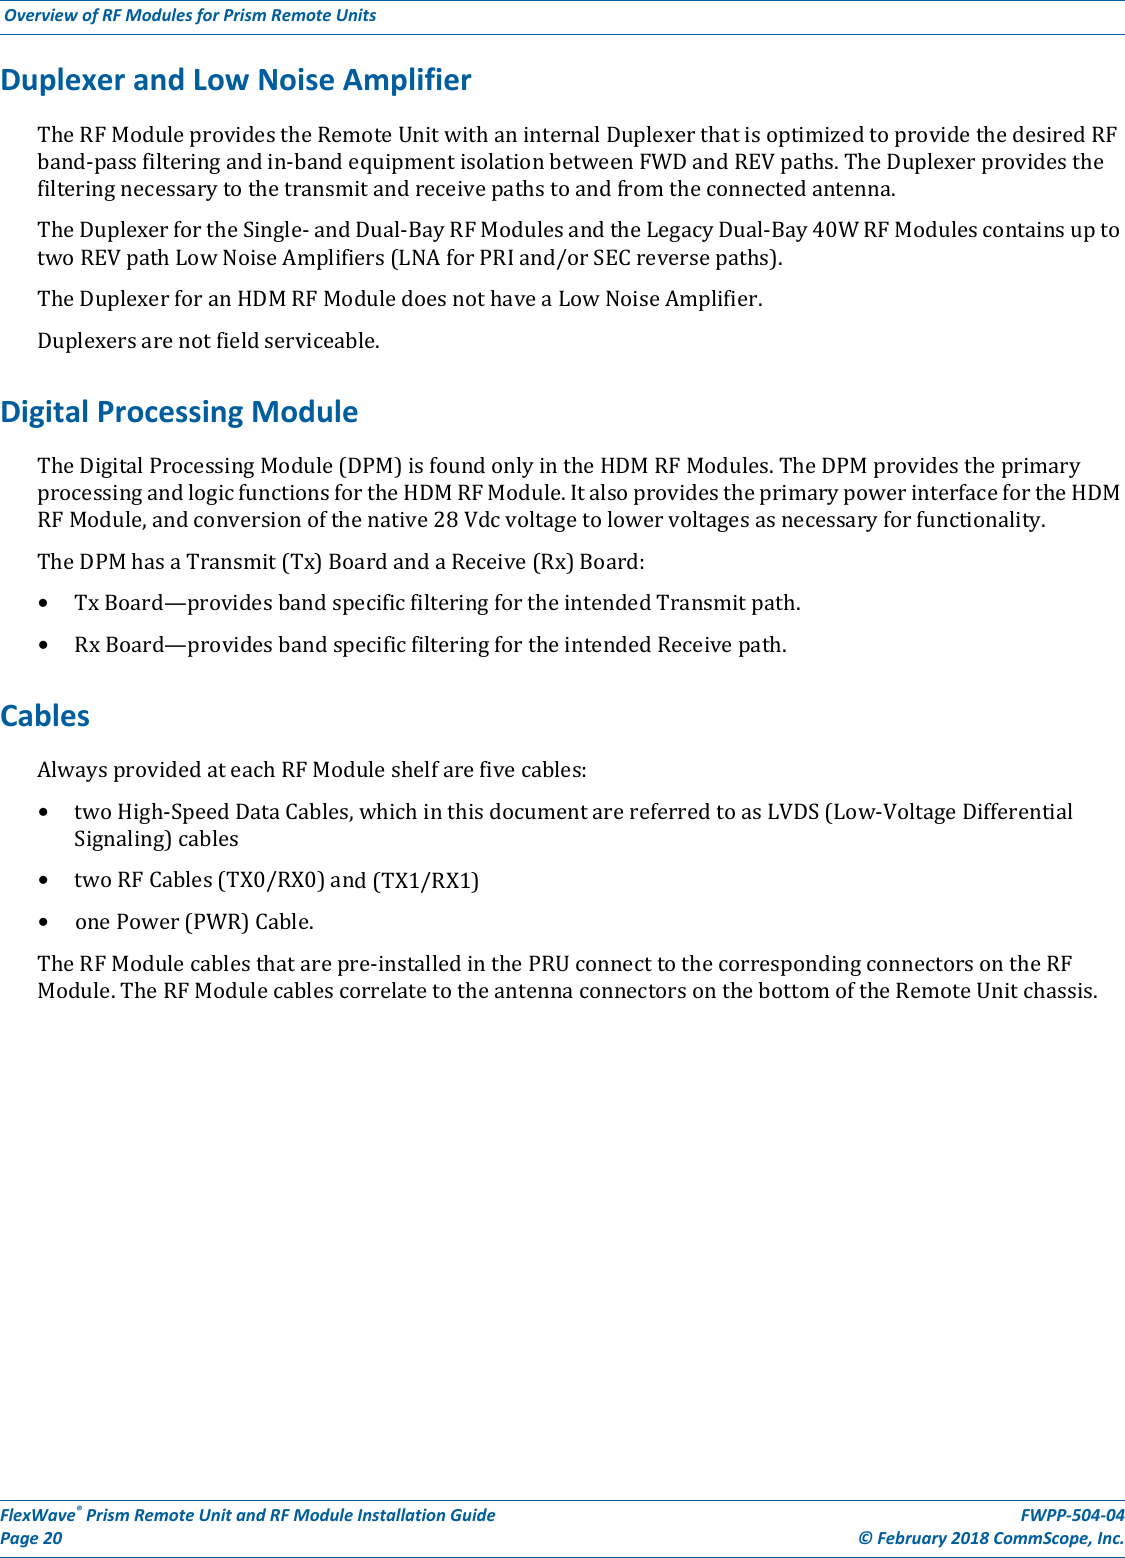 Page 24 of ADC Telecommunications PSM25TDLS FWP-T4ST000MOD-L User Manual FWPP 504 04